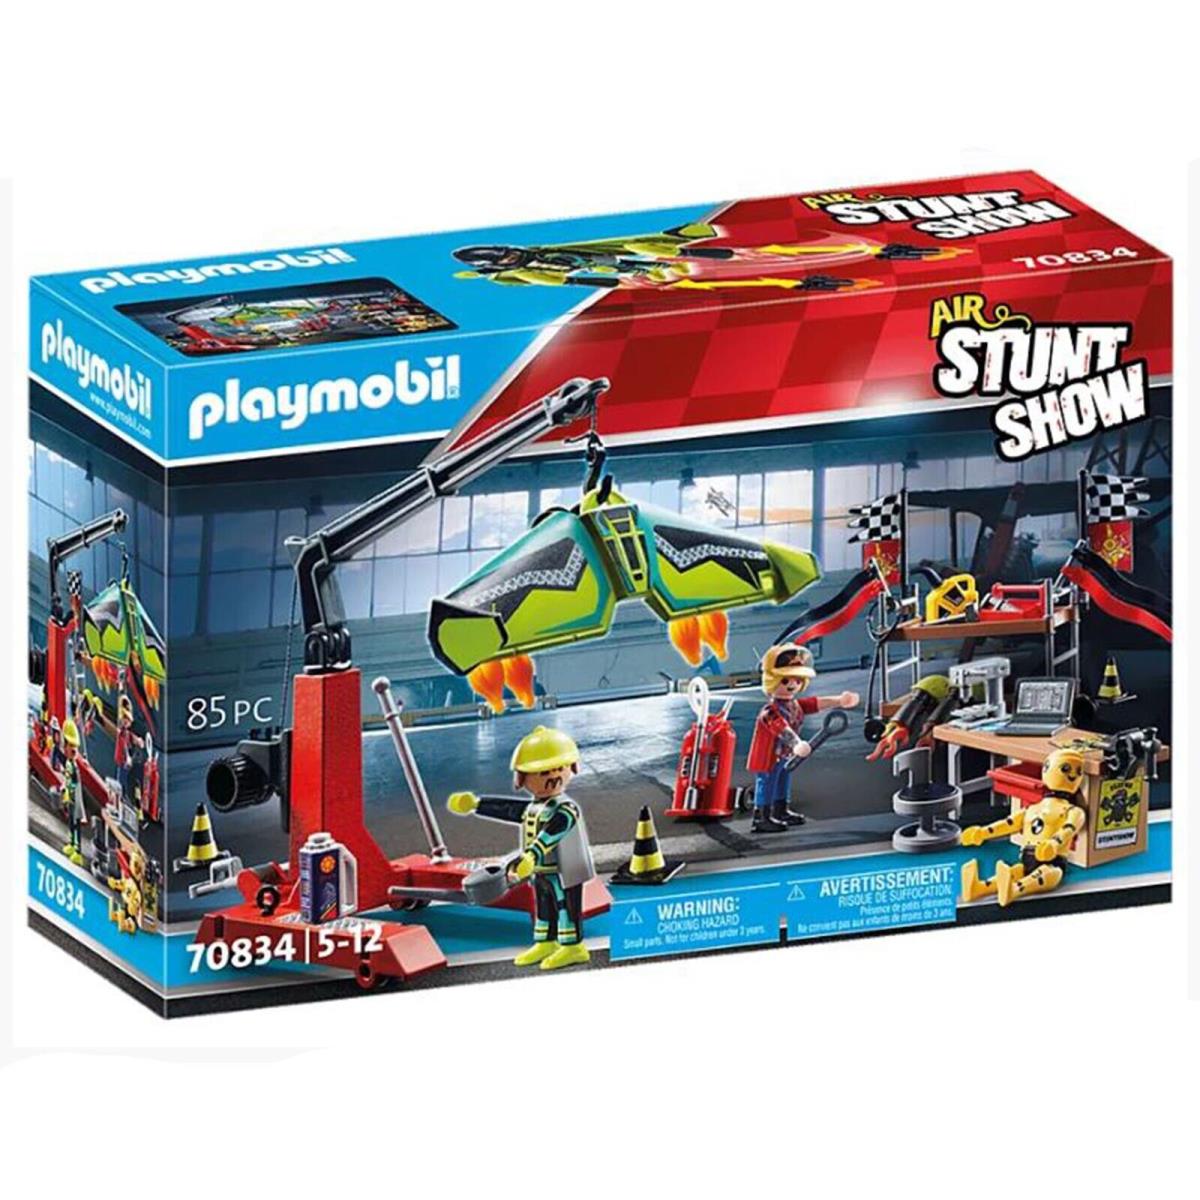 Playmobil Air Stunt Show Service Station Building Set 70834 IN Stock